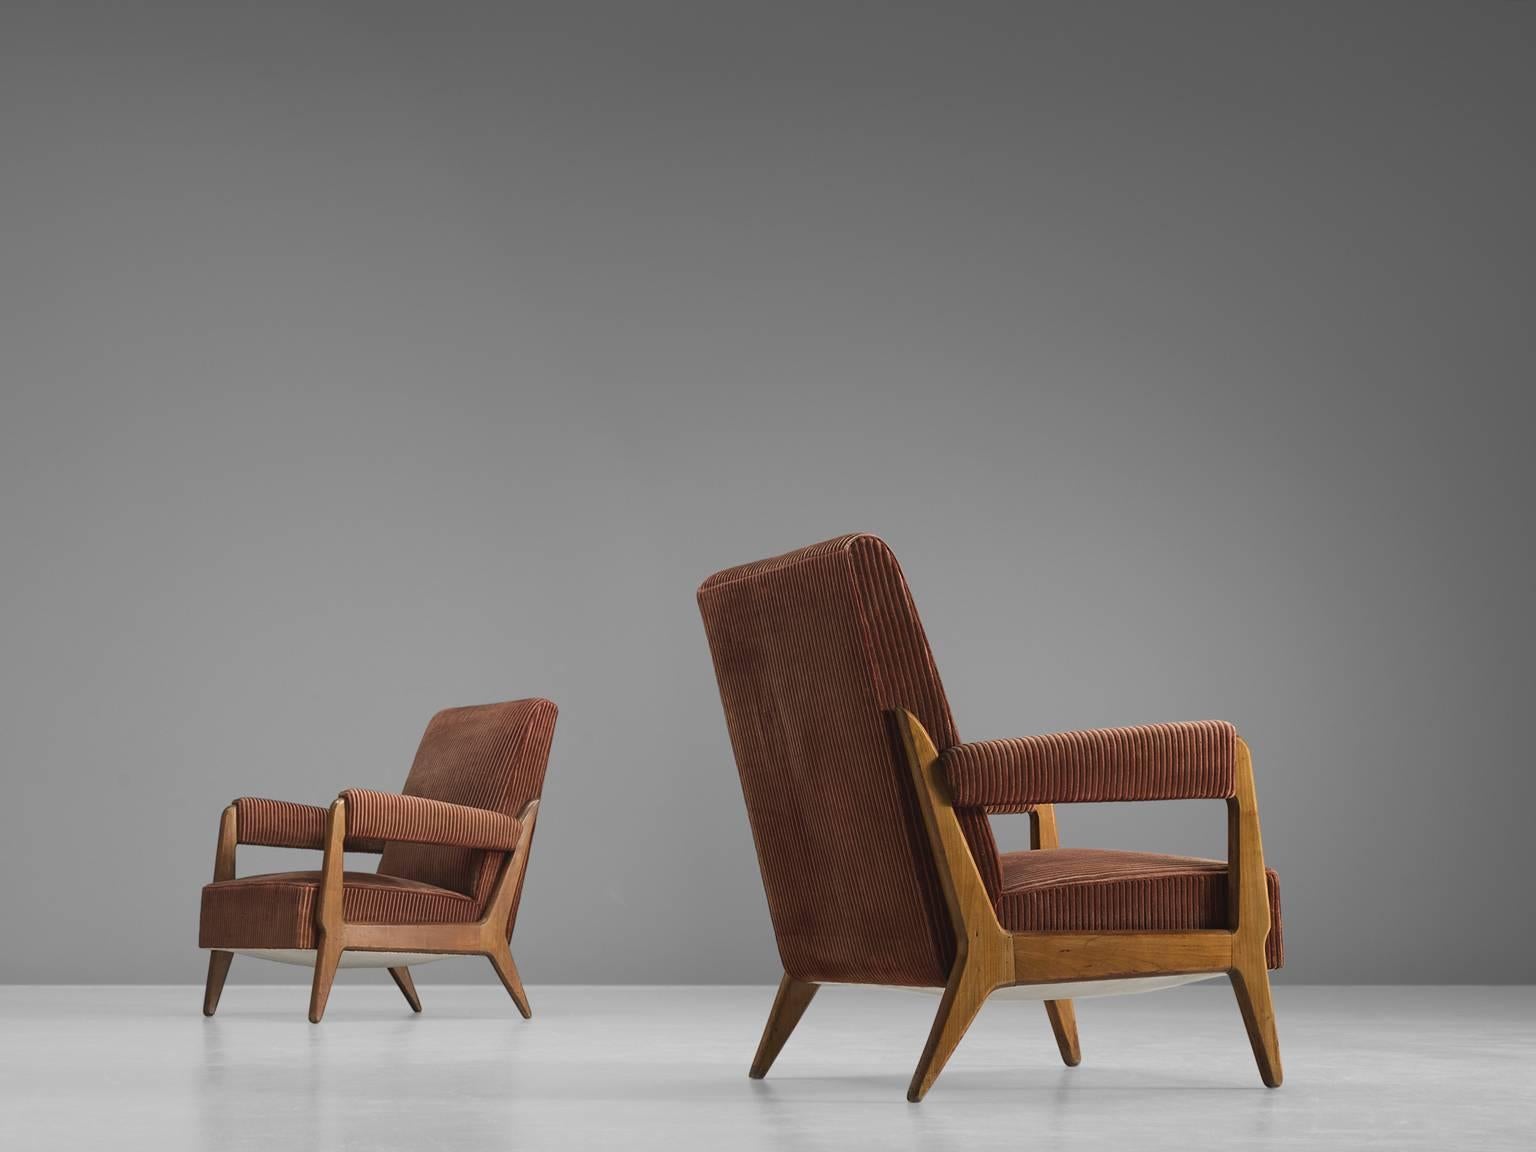 Lounge chairs, oak and fabric, France, 1950s

This set of rich, carved sculptural lounge chairs features a tilted back, upholstered thick armrests and tapered diagonal legs. The open space that exist within the armrests and in between the legs are